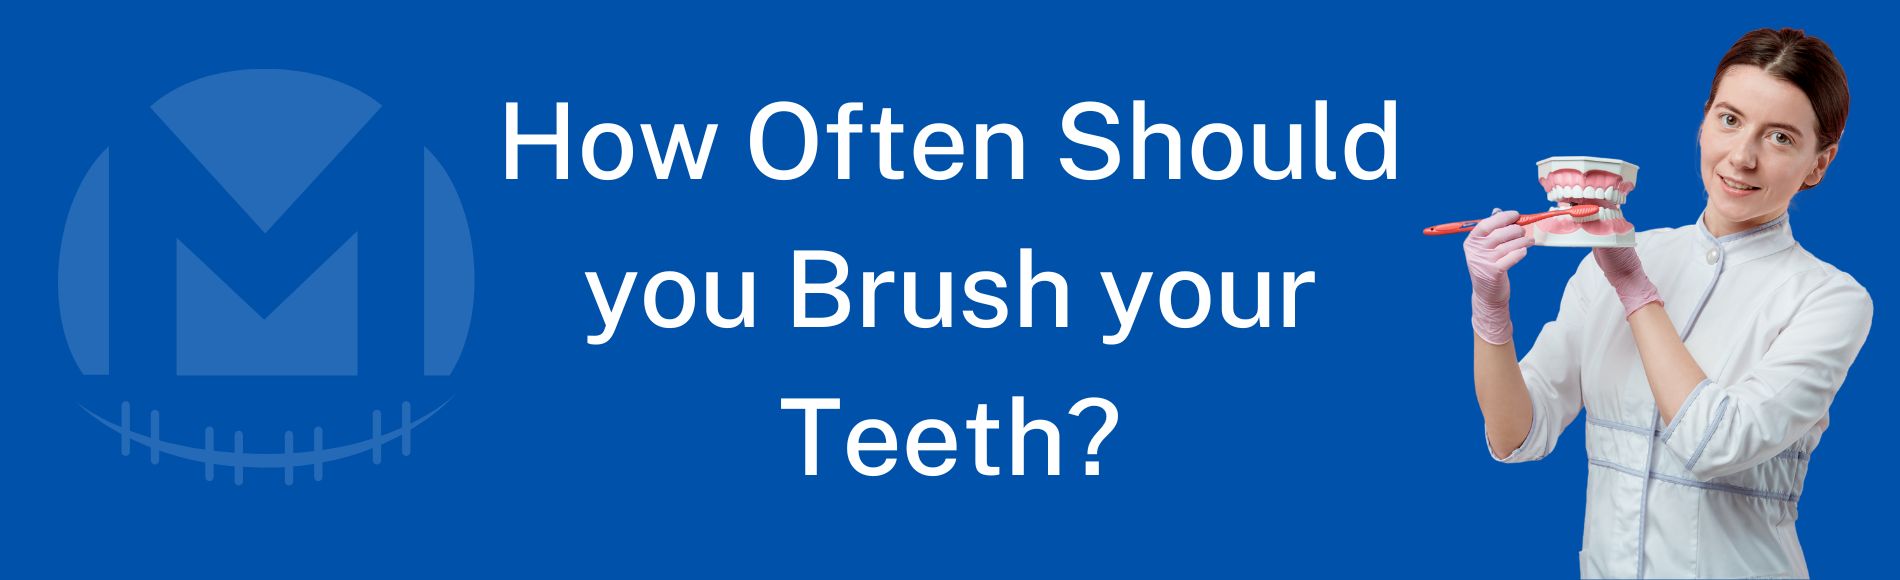 How Often Should you Brush your Teeth